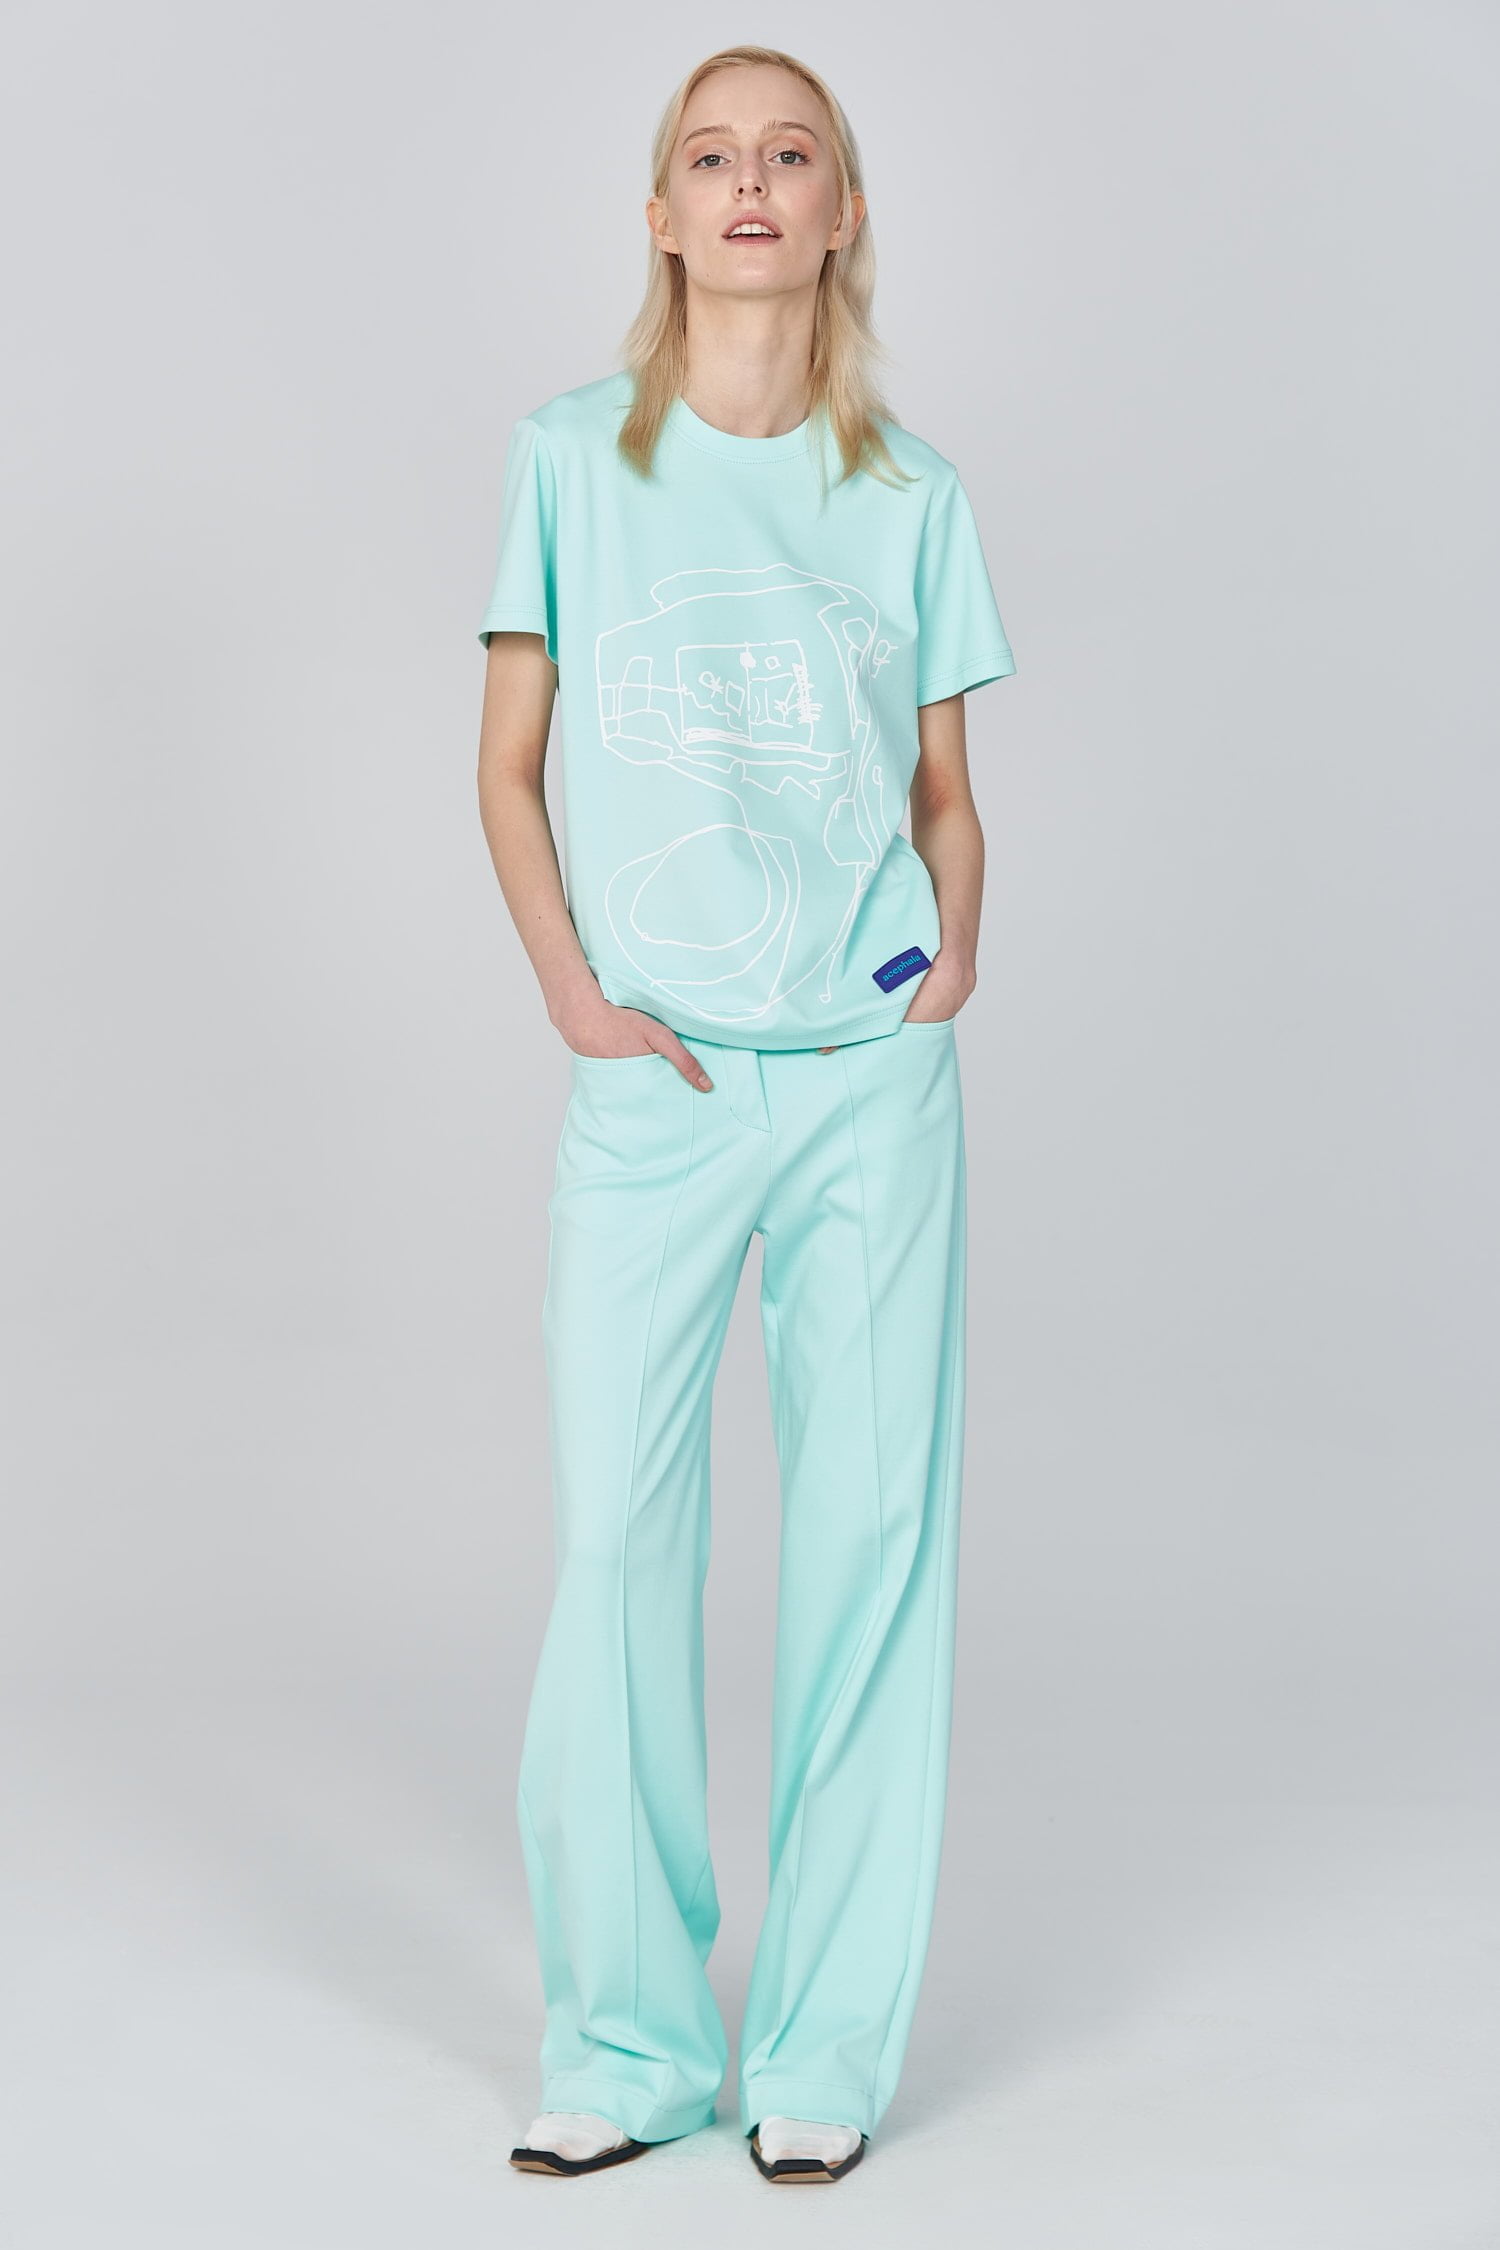 Acephala Ss21 Mint T Shirt Flared Trousers Front Relaxed 2